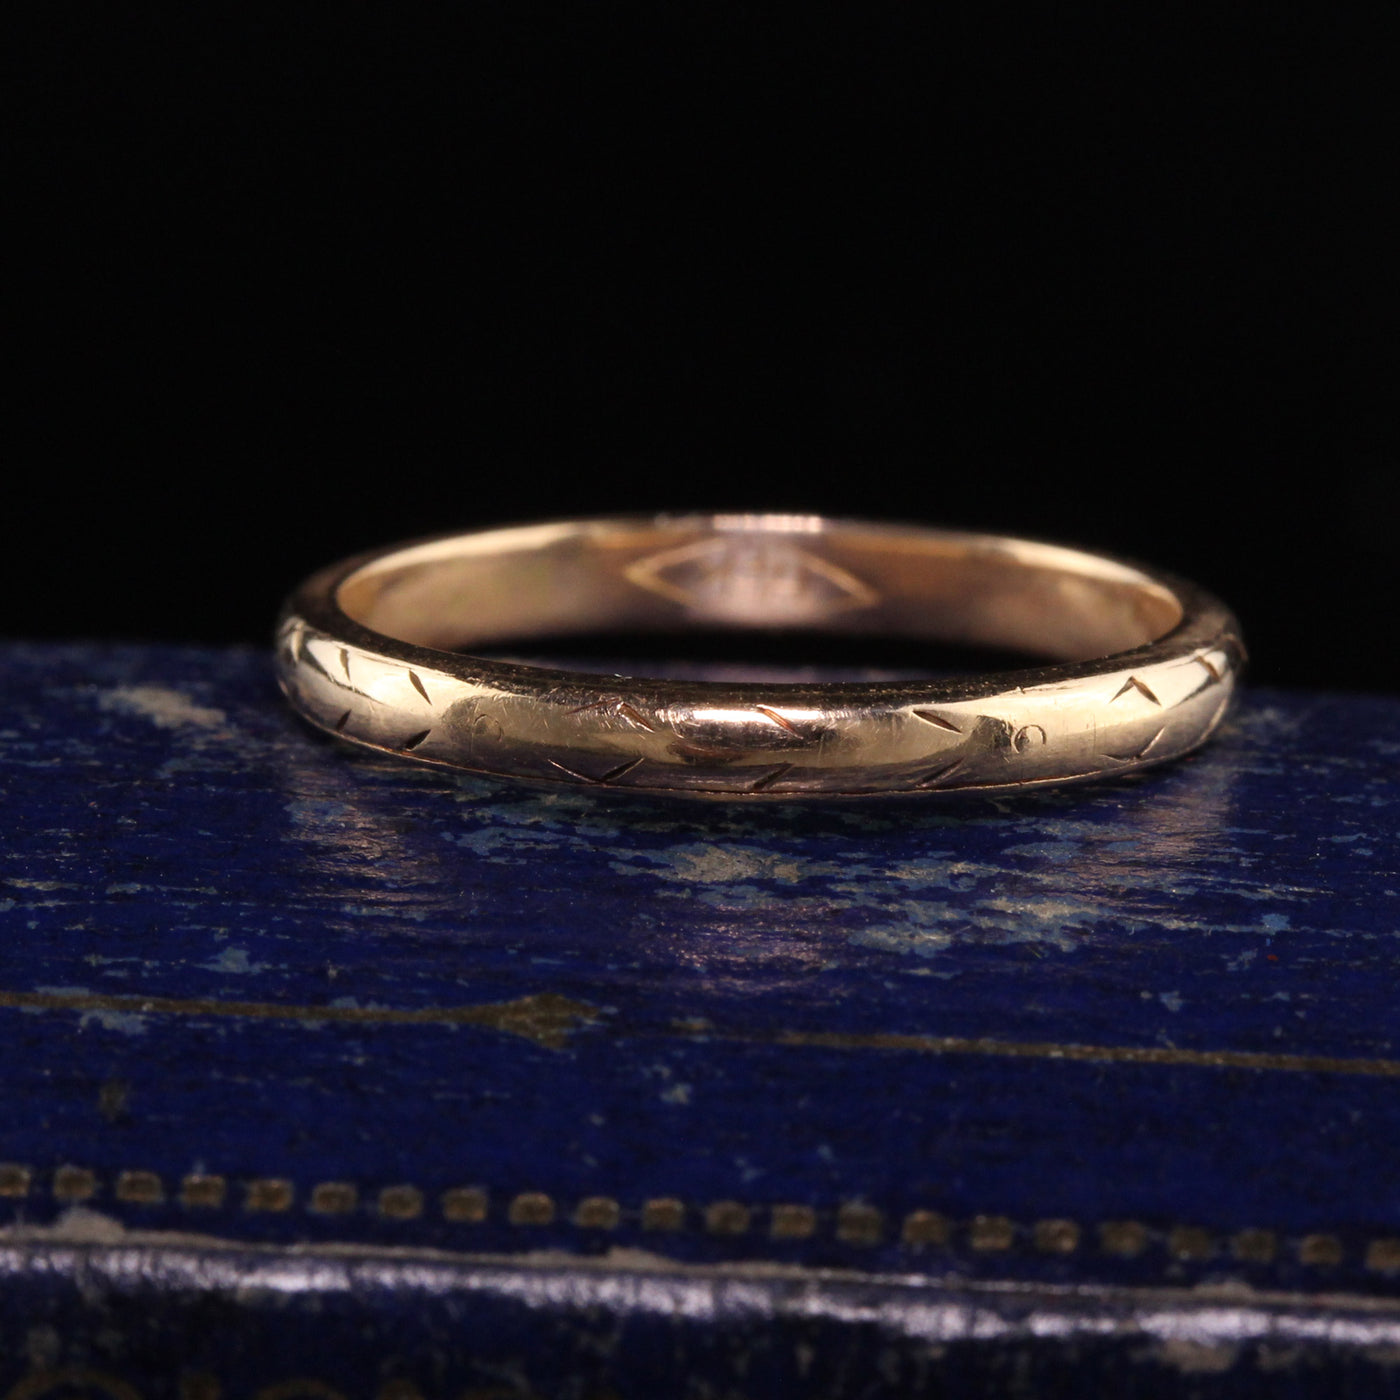 Antique Art Deco 14K Yellow Gold Engraved Wedding Band - Size 6